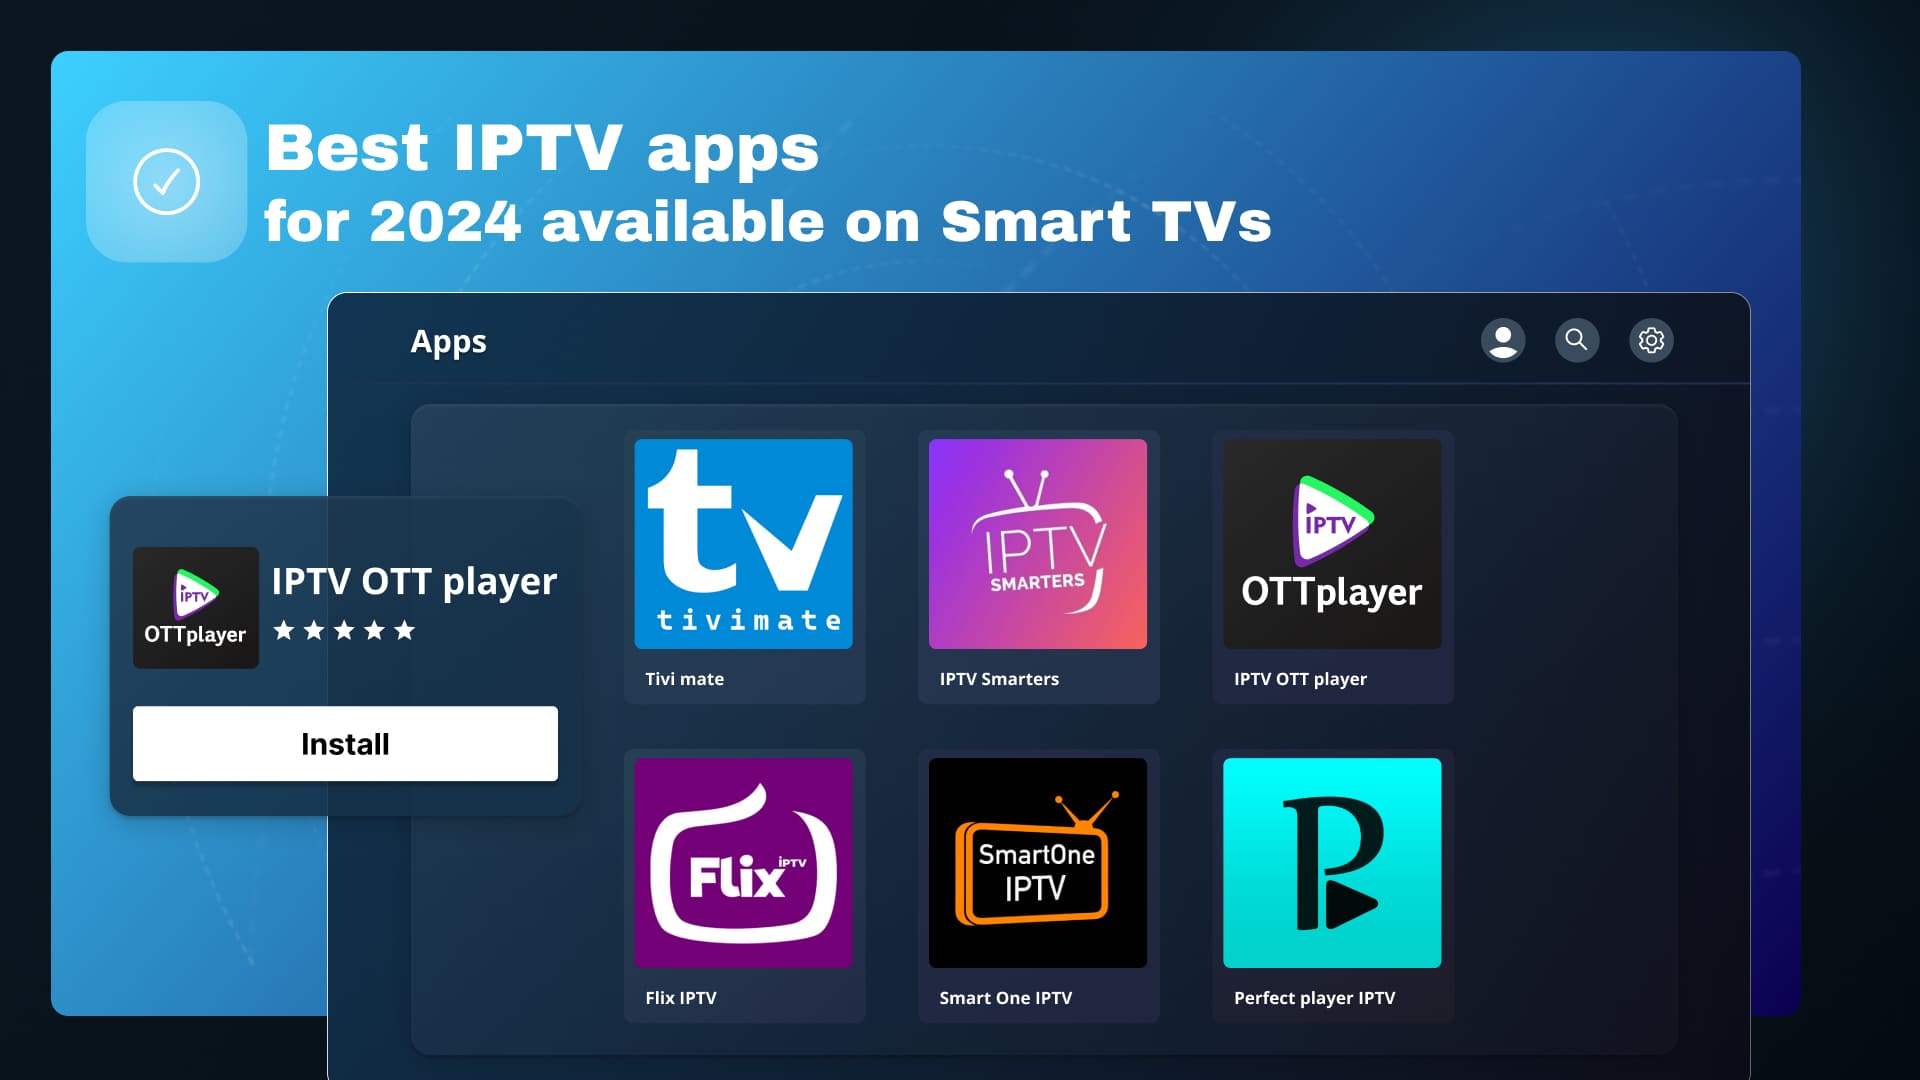 Best IPTV apps for 2024 available on Smart TVs